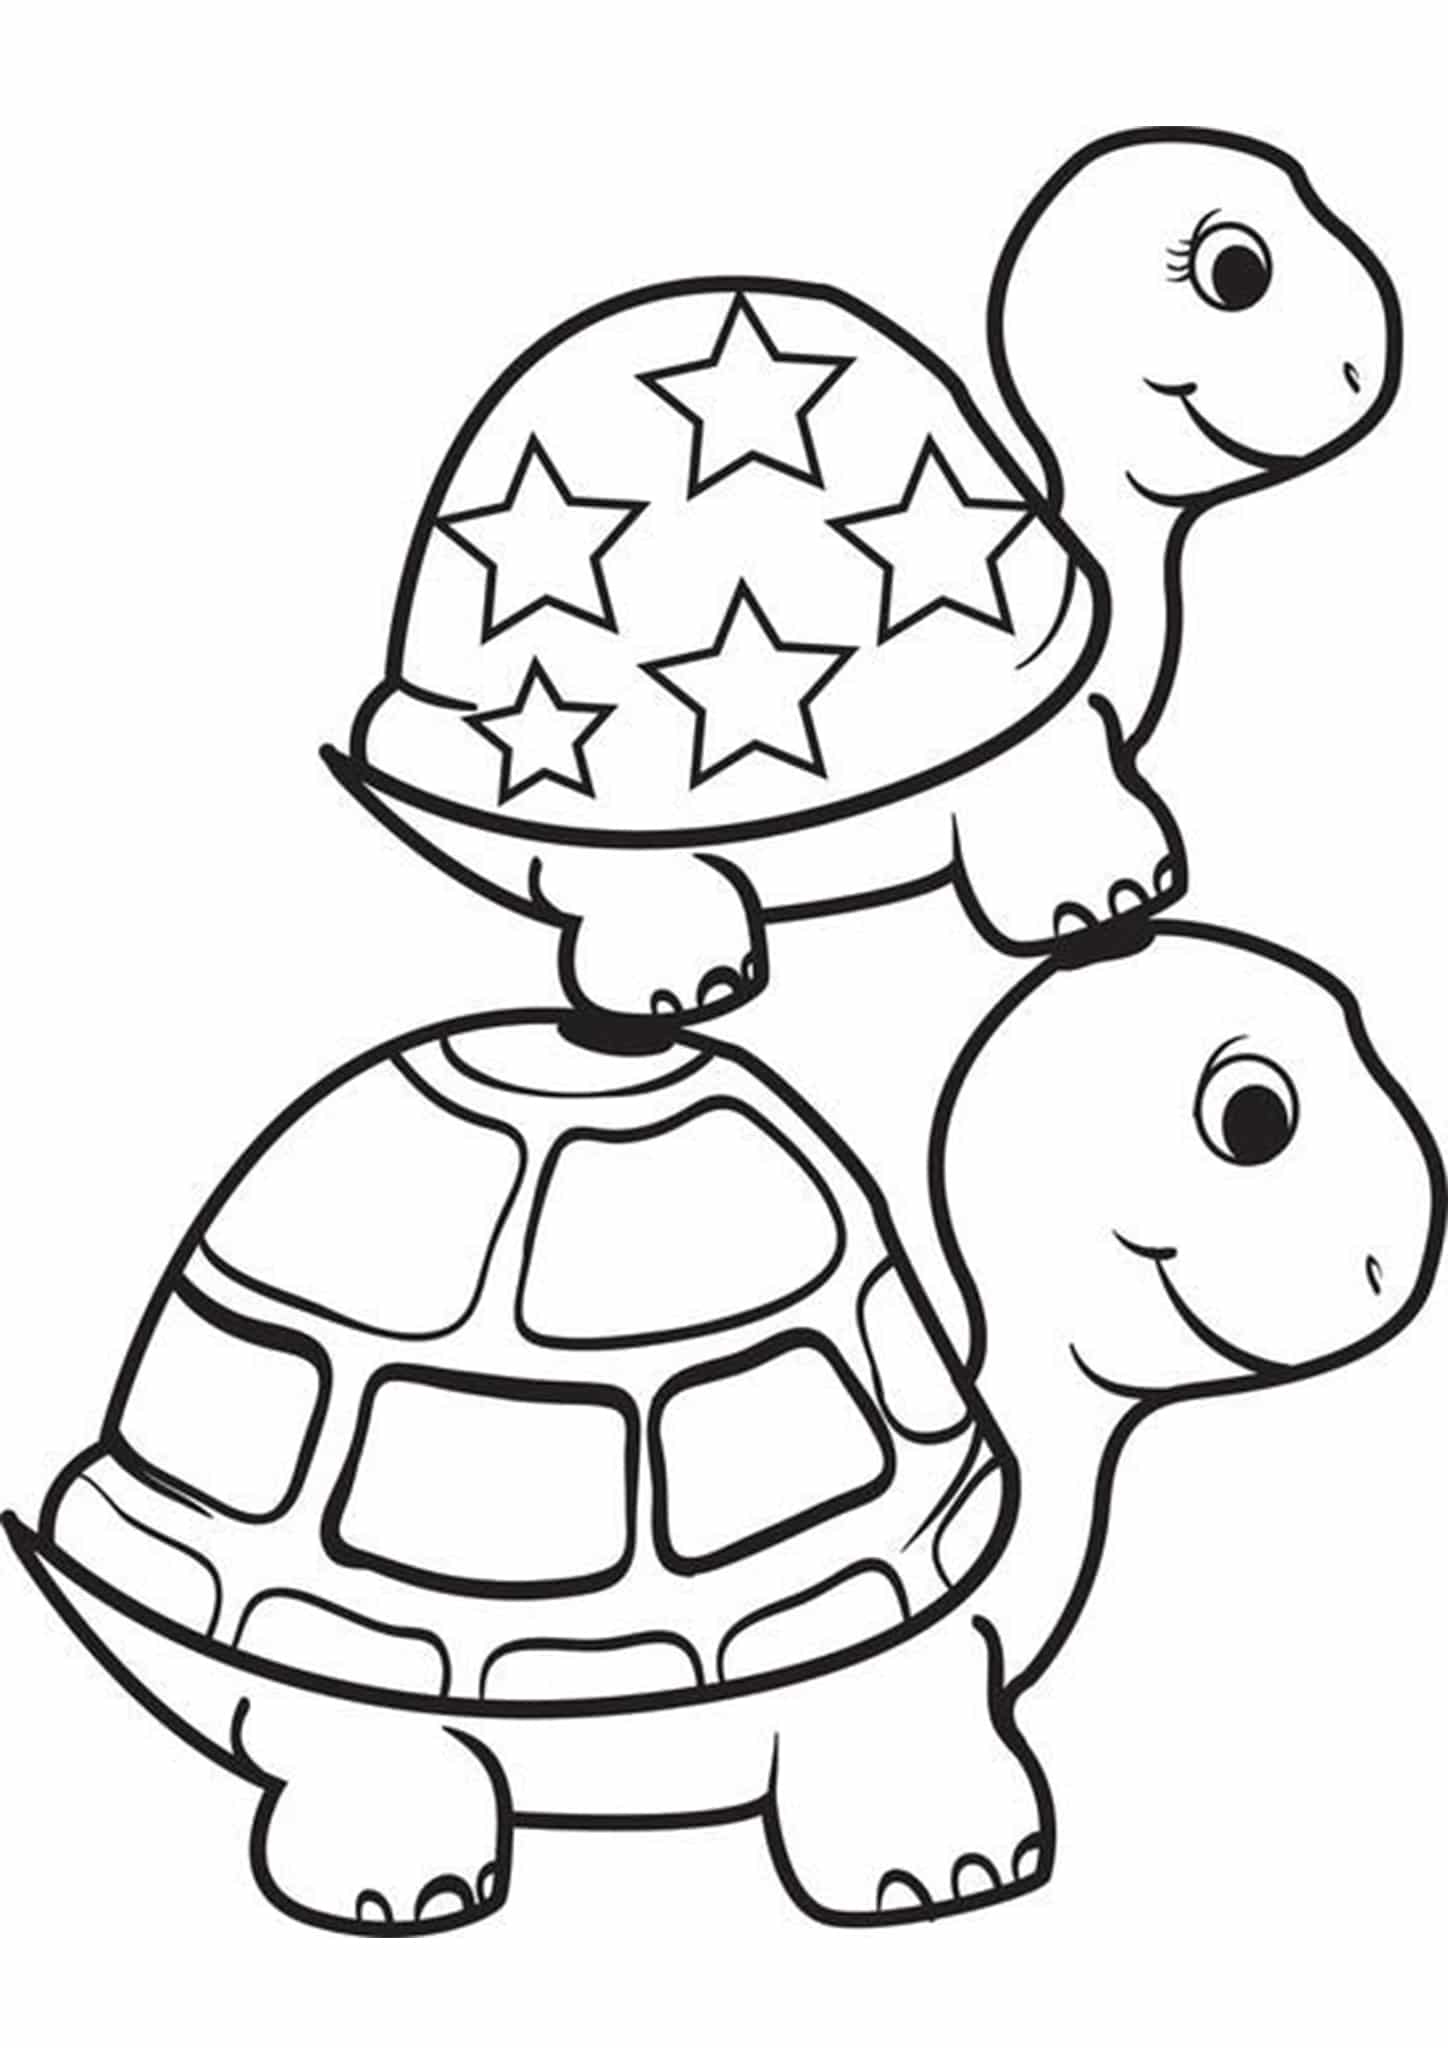 Free easy to print turtle coloring pages